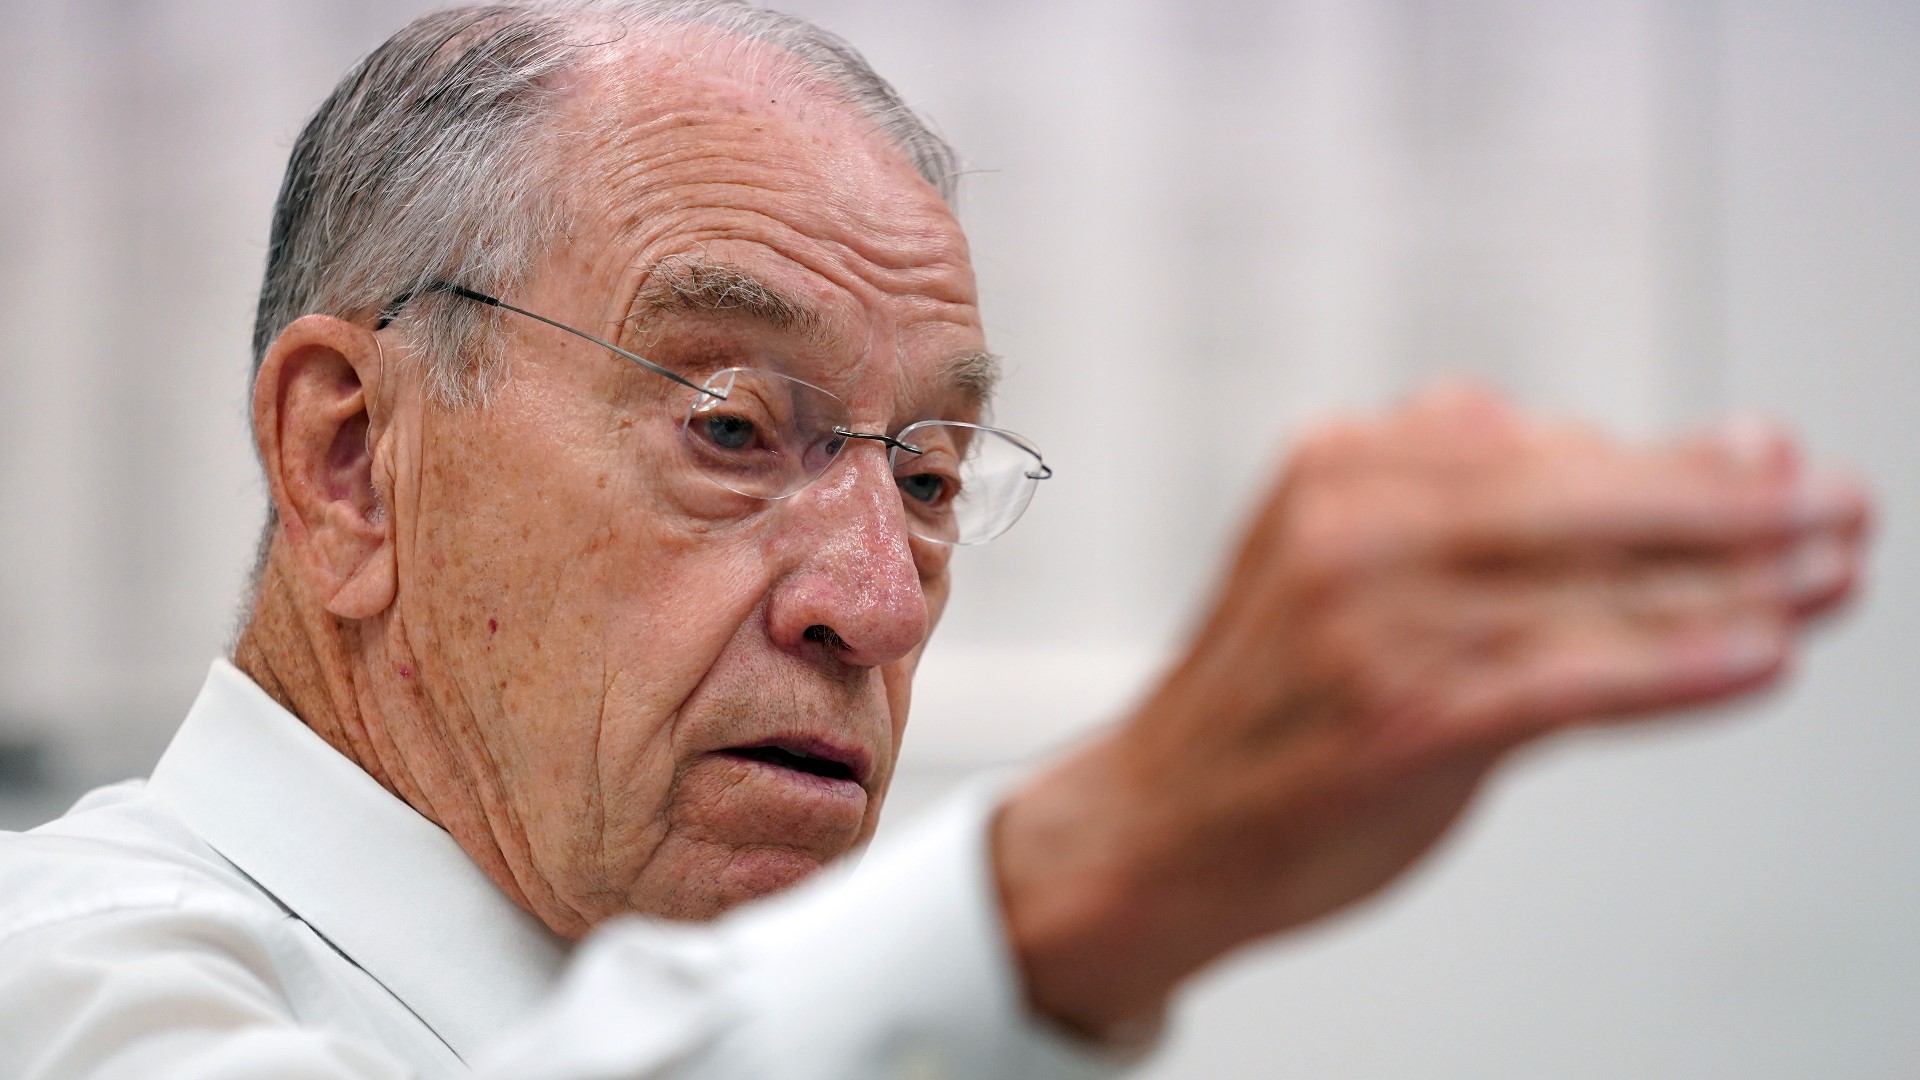 “Serving Iowans in the United States Senate is a tremendous honor. I’m working as hard as ever for the people of Iowa and there’s more work to do," Grassley said.